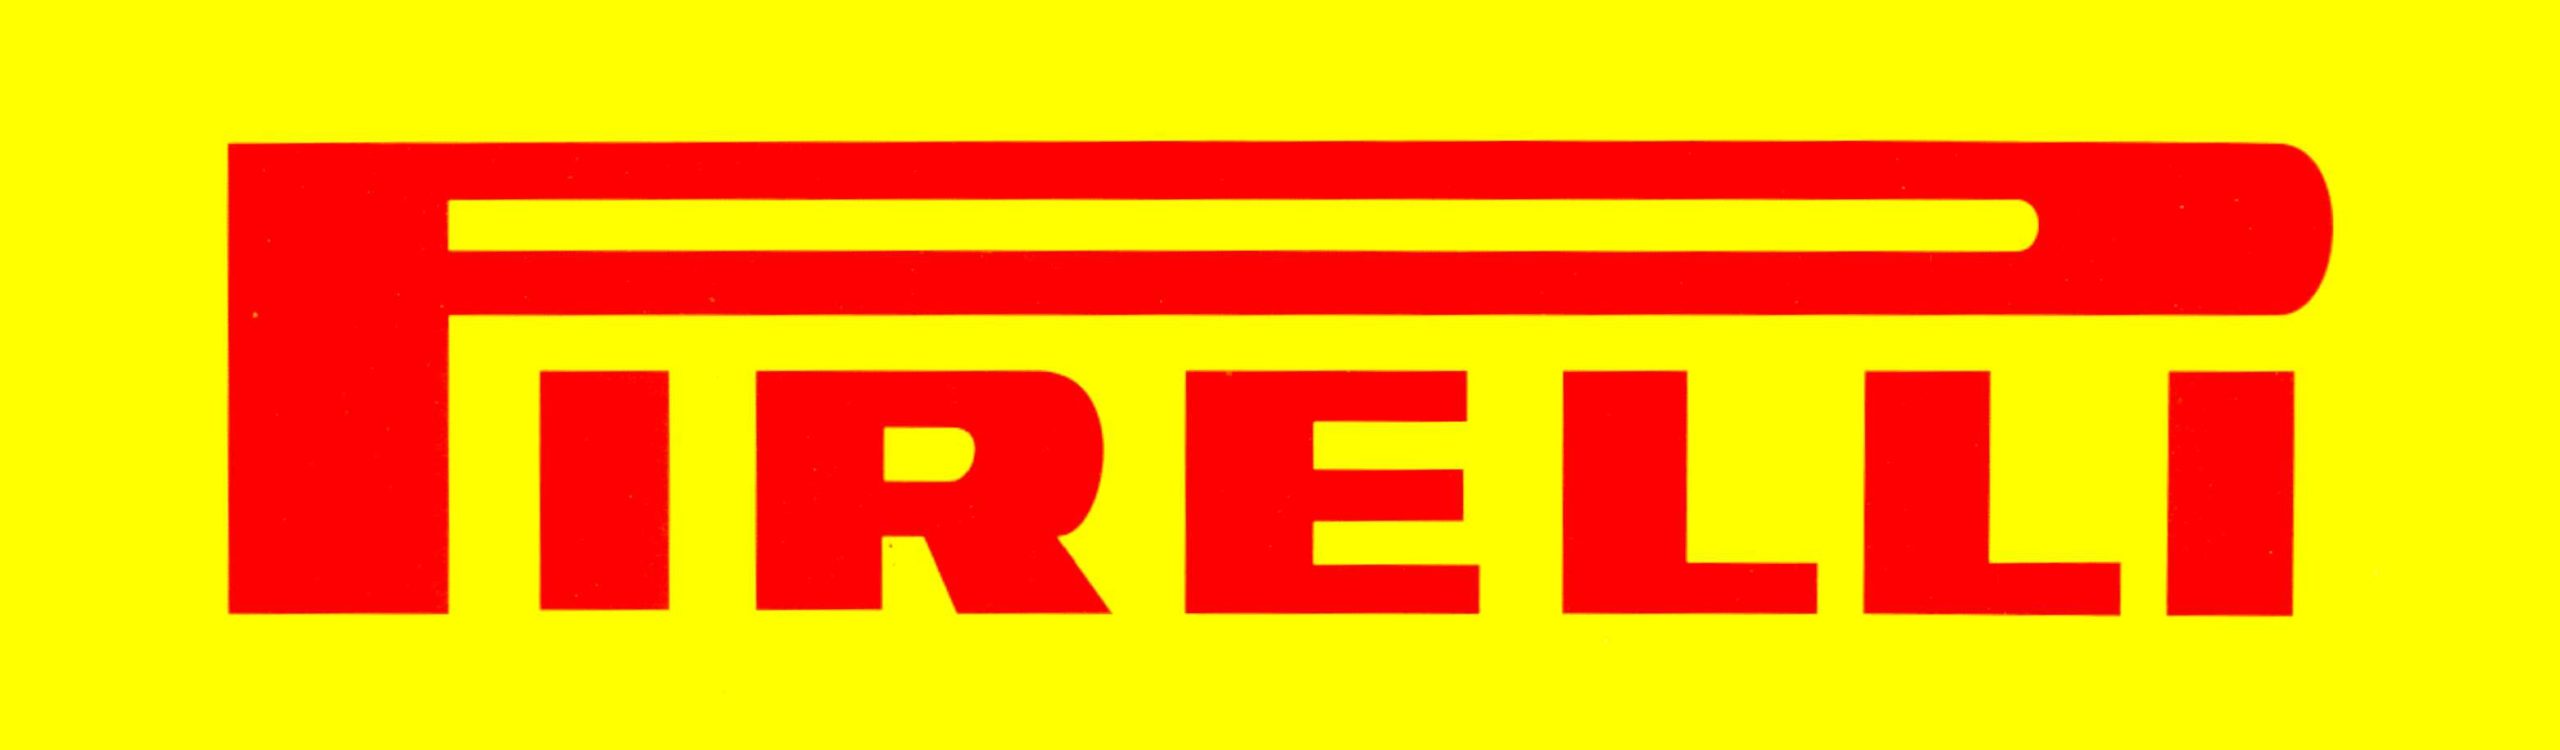 pirelli-logo-and-symbol-meaning-history-png-brand